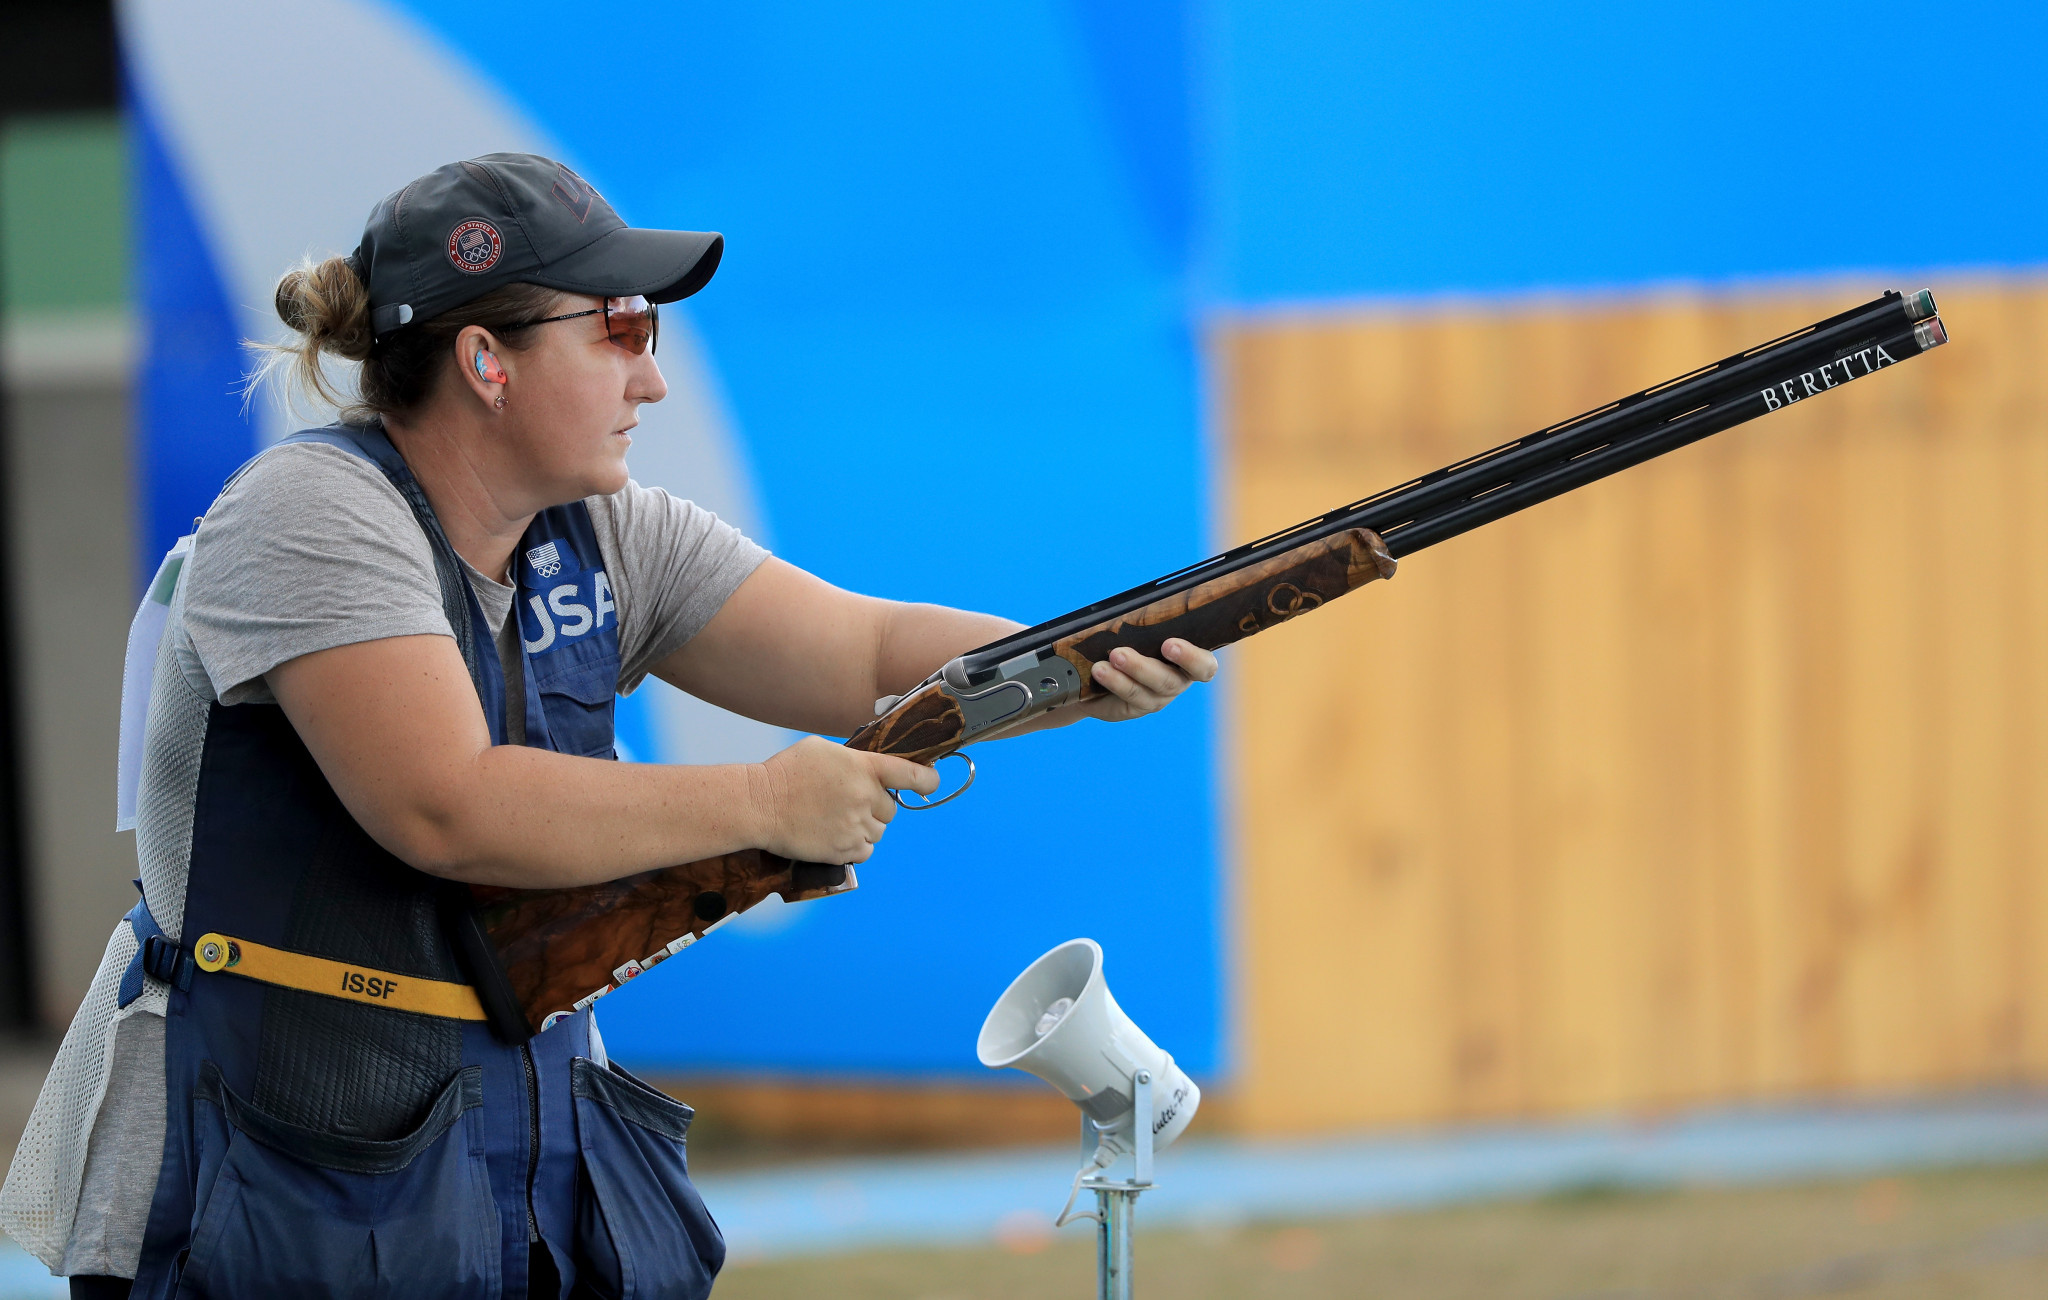 Kim Rhode won the women's prize after her skeet success ©Getty Images